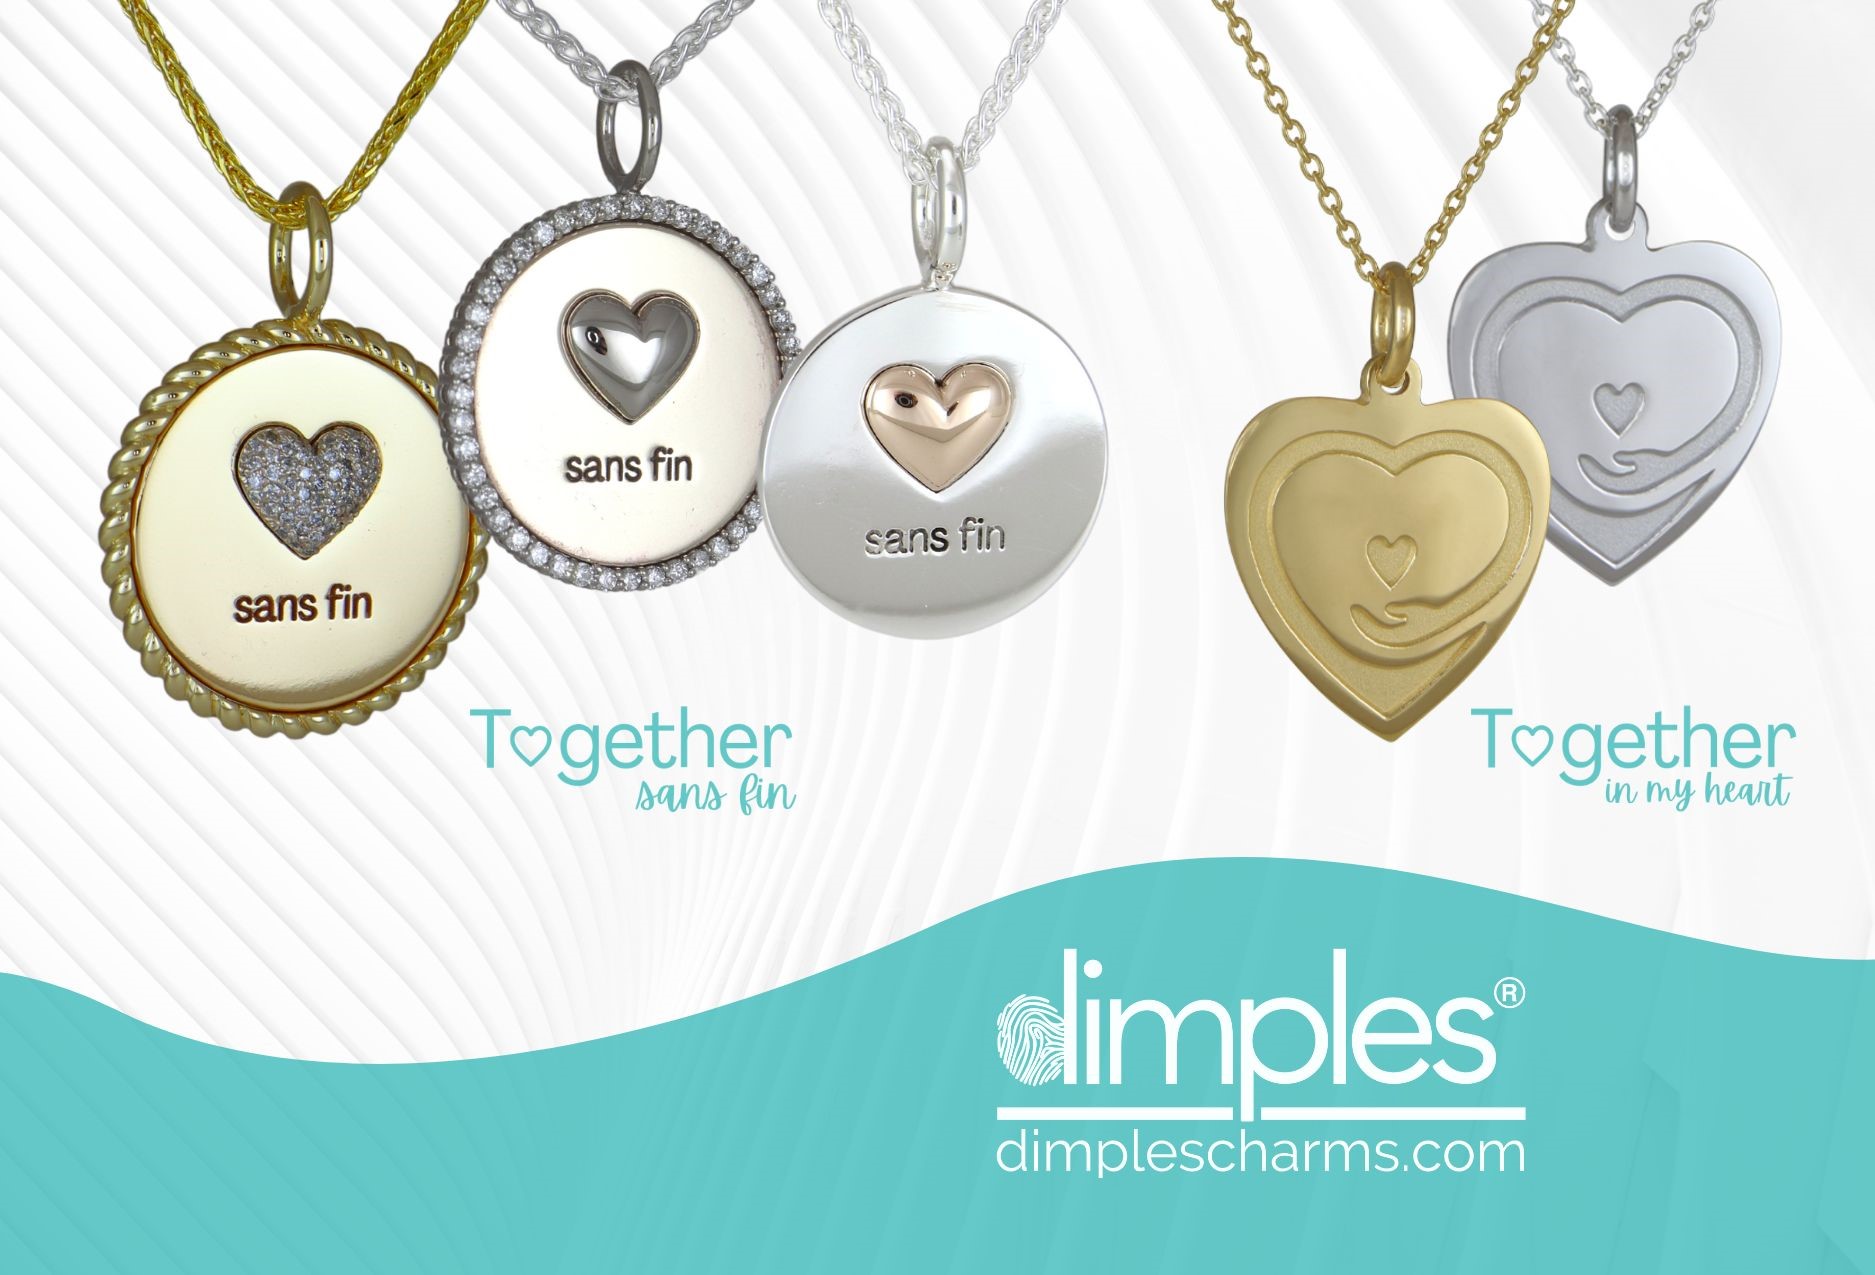 Dimples Releases New Jewelry Collection, Together, in Support of National Childhood Cancer Awareness Month